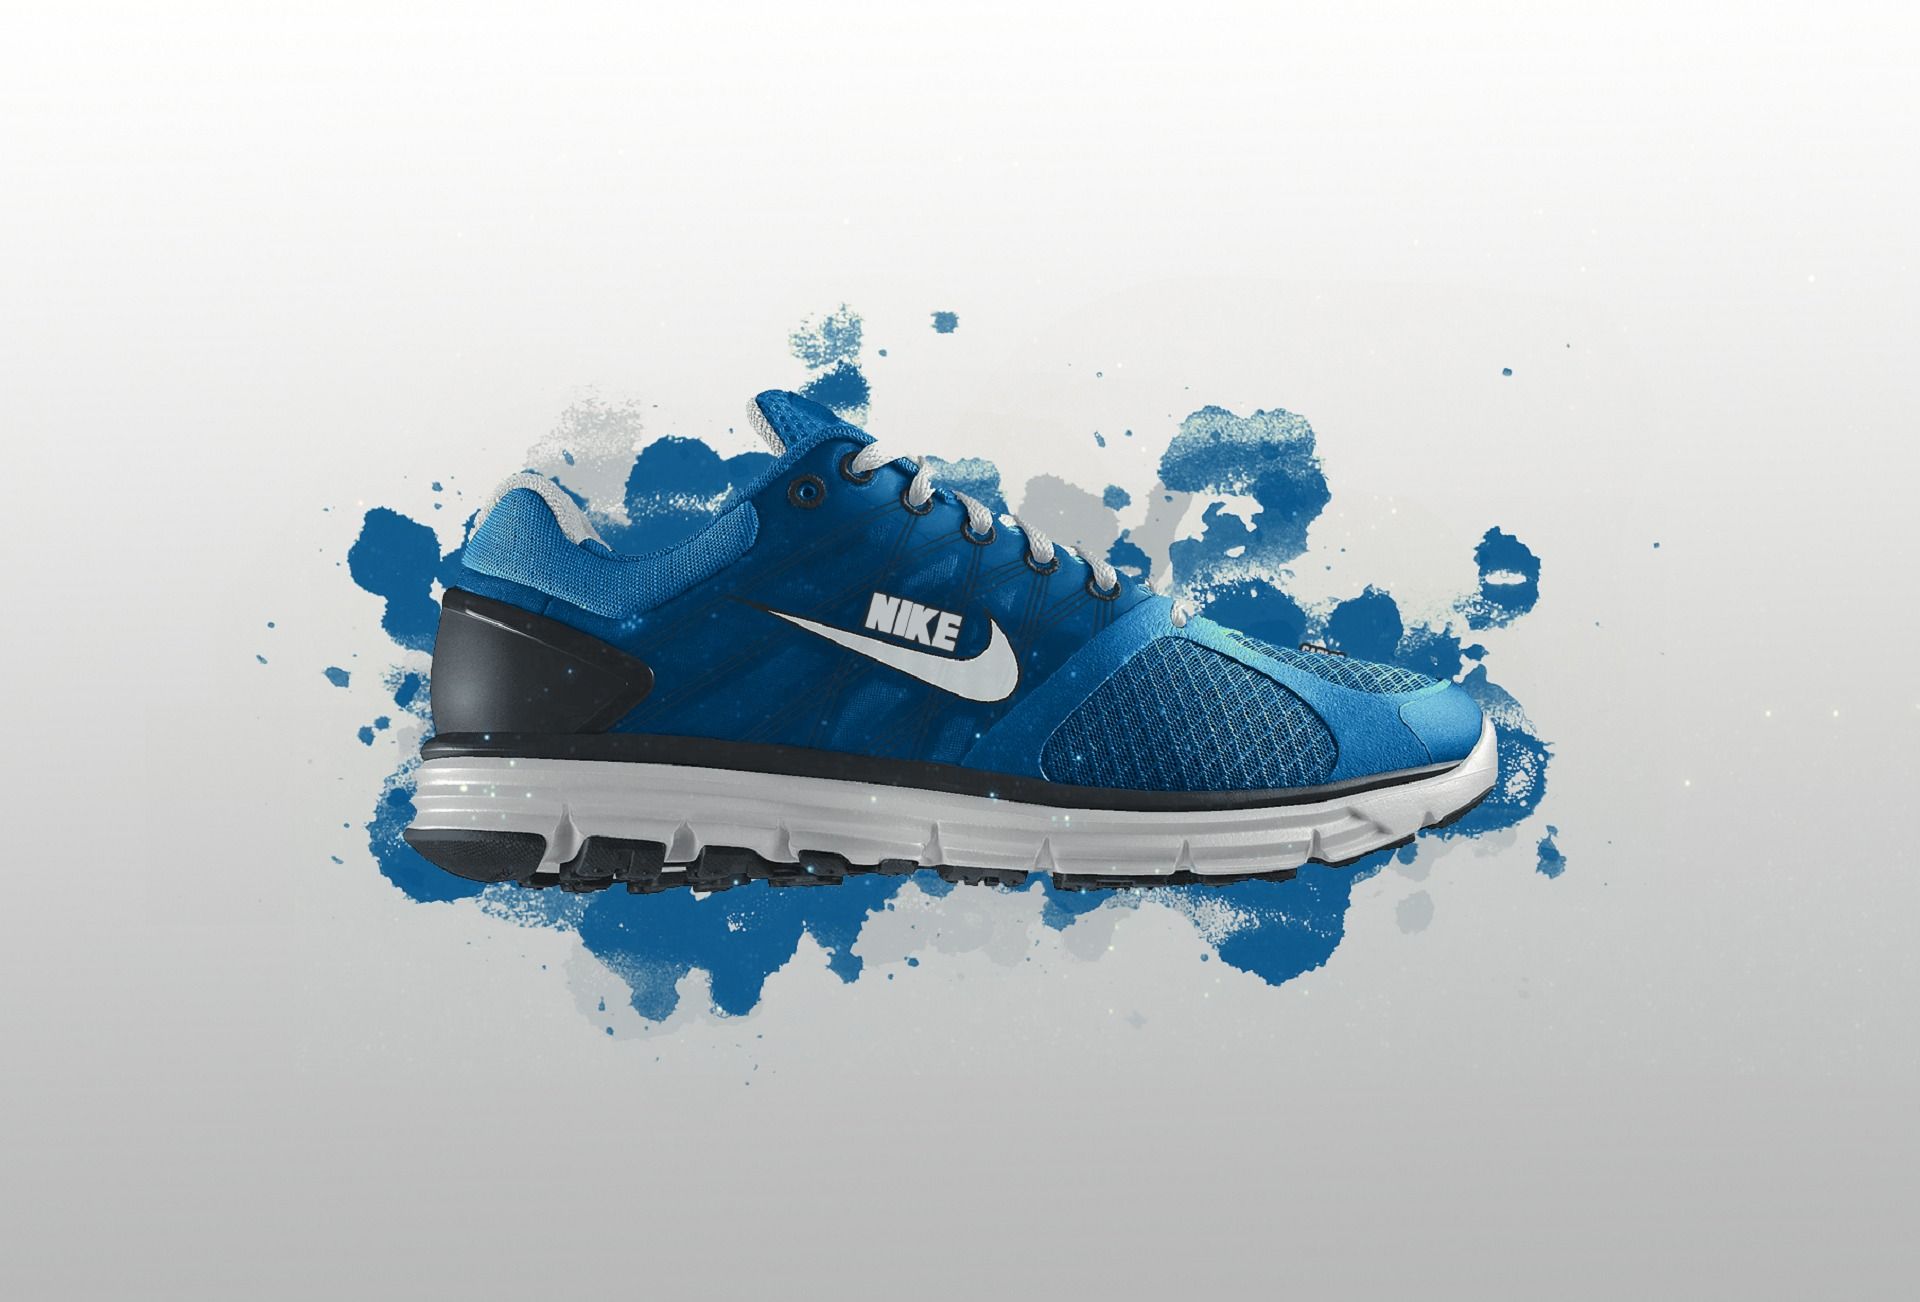 Free download Nike shoes sports style brand logo color running shoe style [1920x1302] for your Desktop, Mobile & Tablet. Explore Nike Blue Smoke Wallpaper. Nike Wallpaper, Nike Wallpaper For